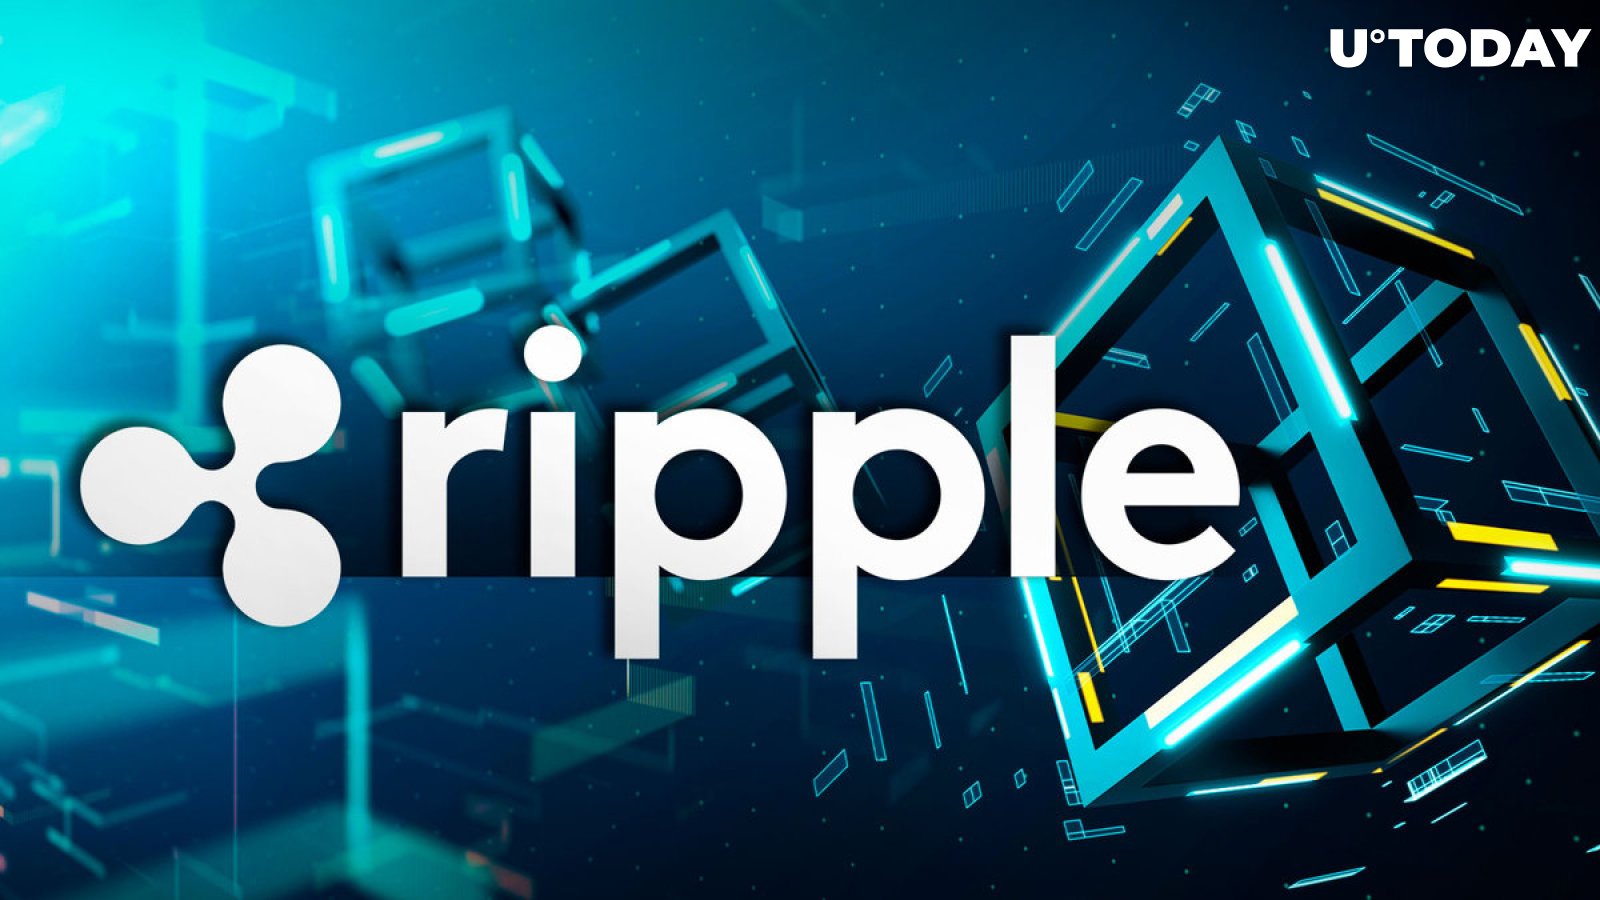 Ripple's Grand Plan for Global Payments With Blockchain Revealed